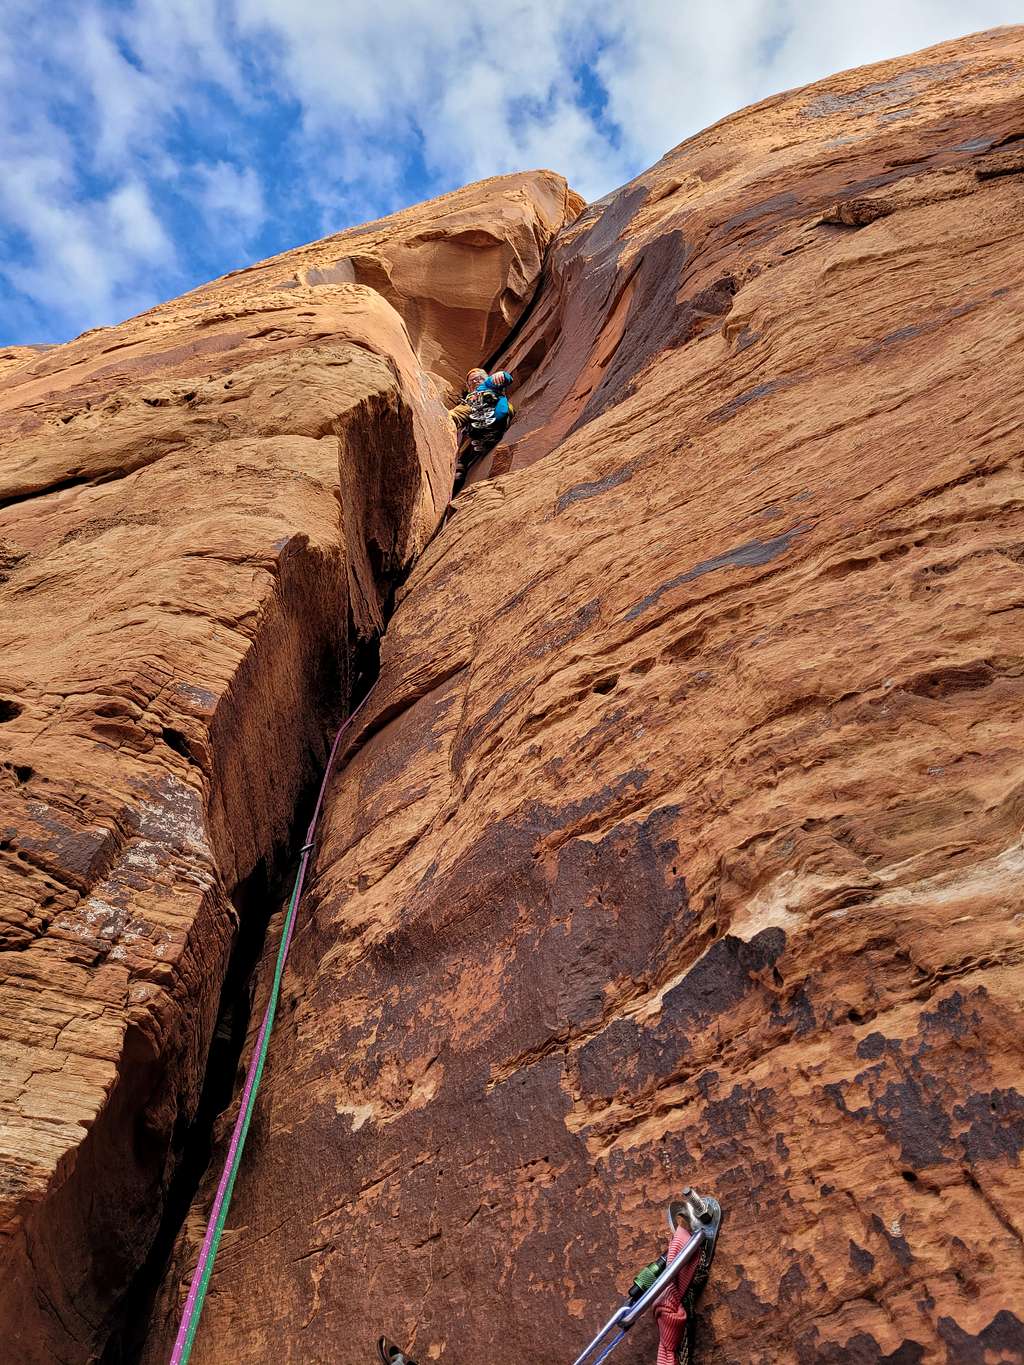 Dow leading the crux pitch of LC & KC